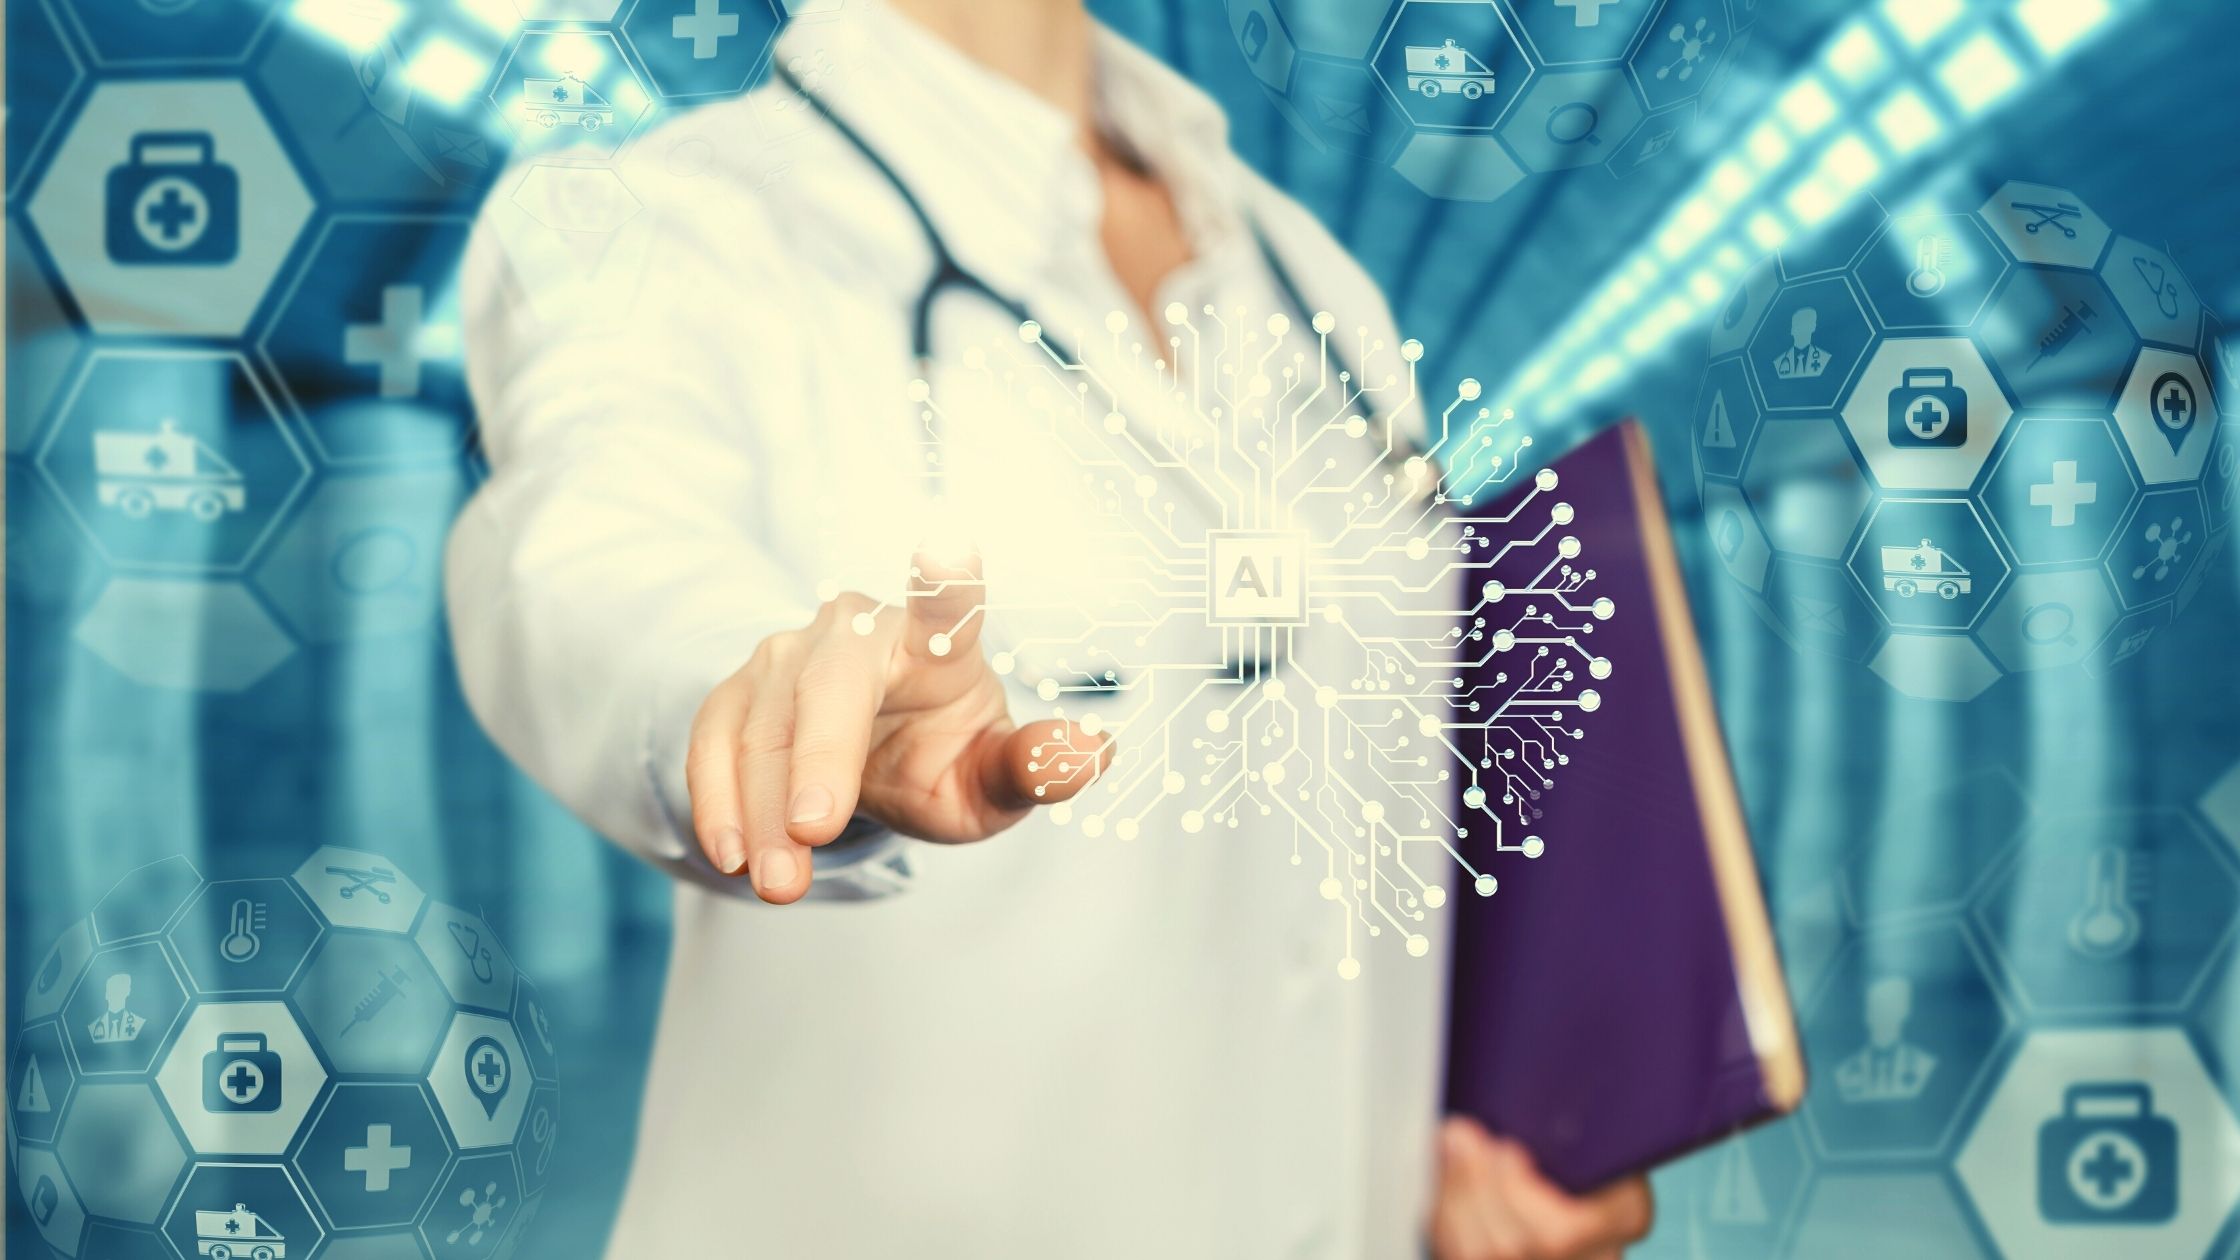 Featured - what nurses need to know about AI part 1